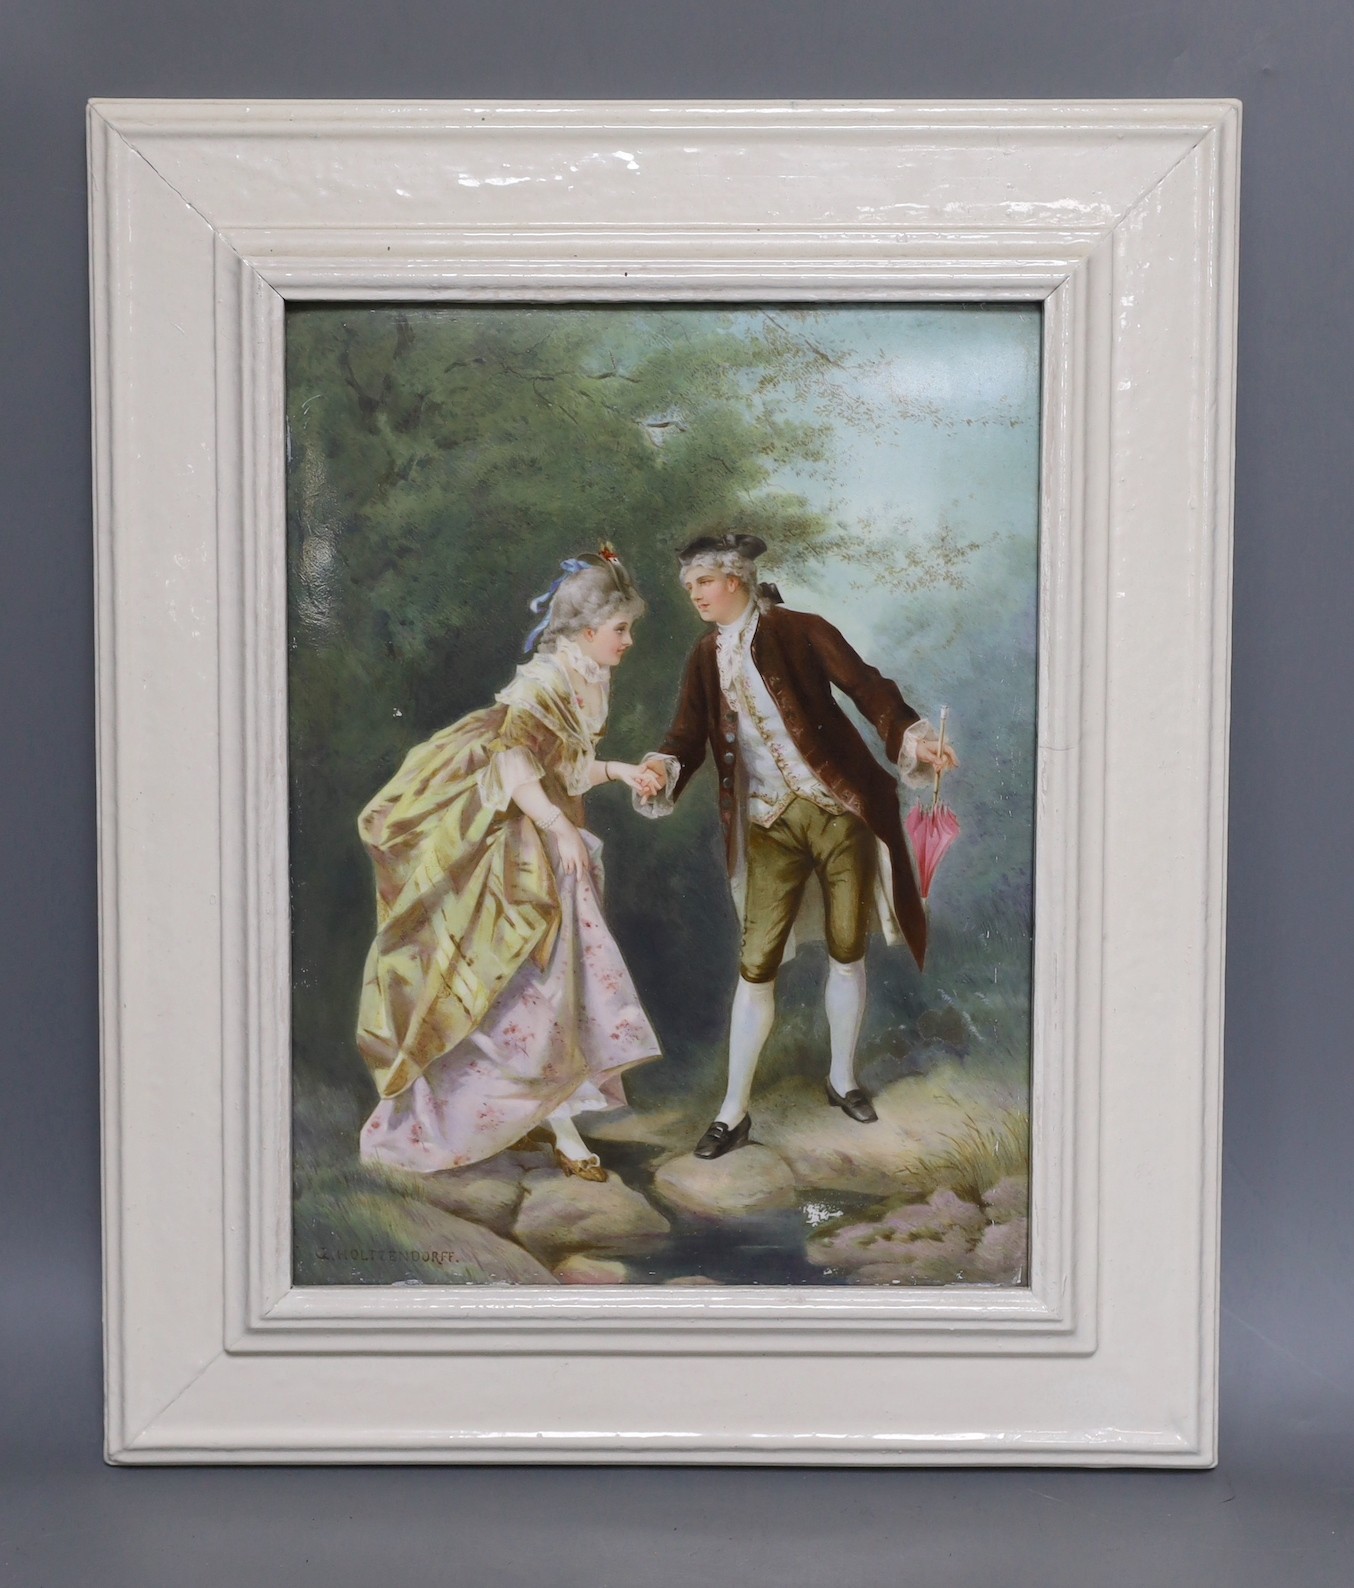 A Continental porcelain plaque depicting Otto Eduard Erdmann’s courting scene ‘The Romantic Stroll’, in white frame. 26 x 19cm